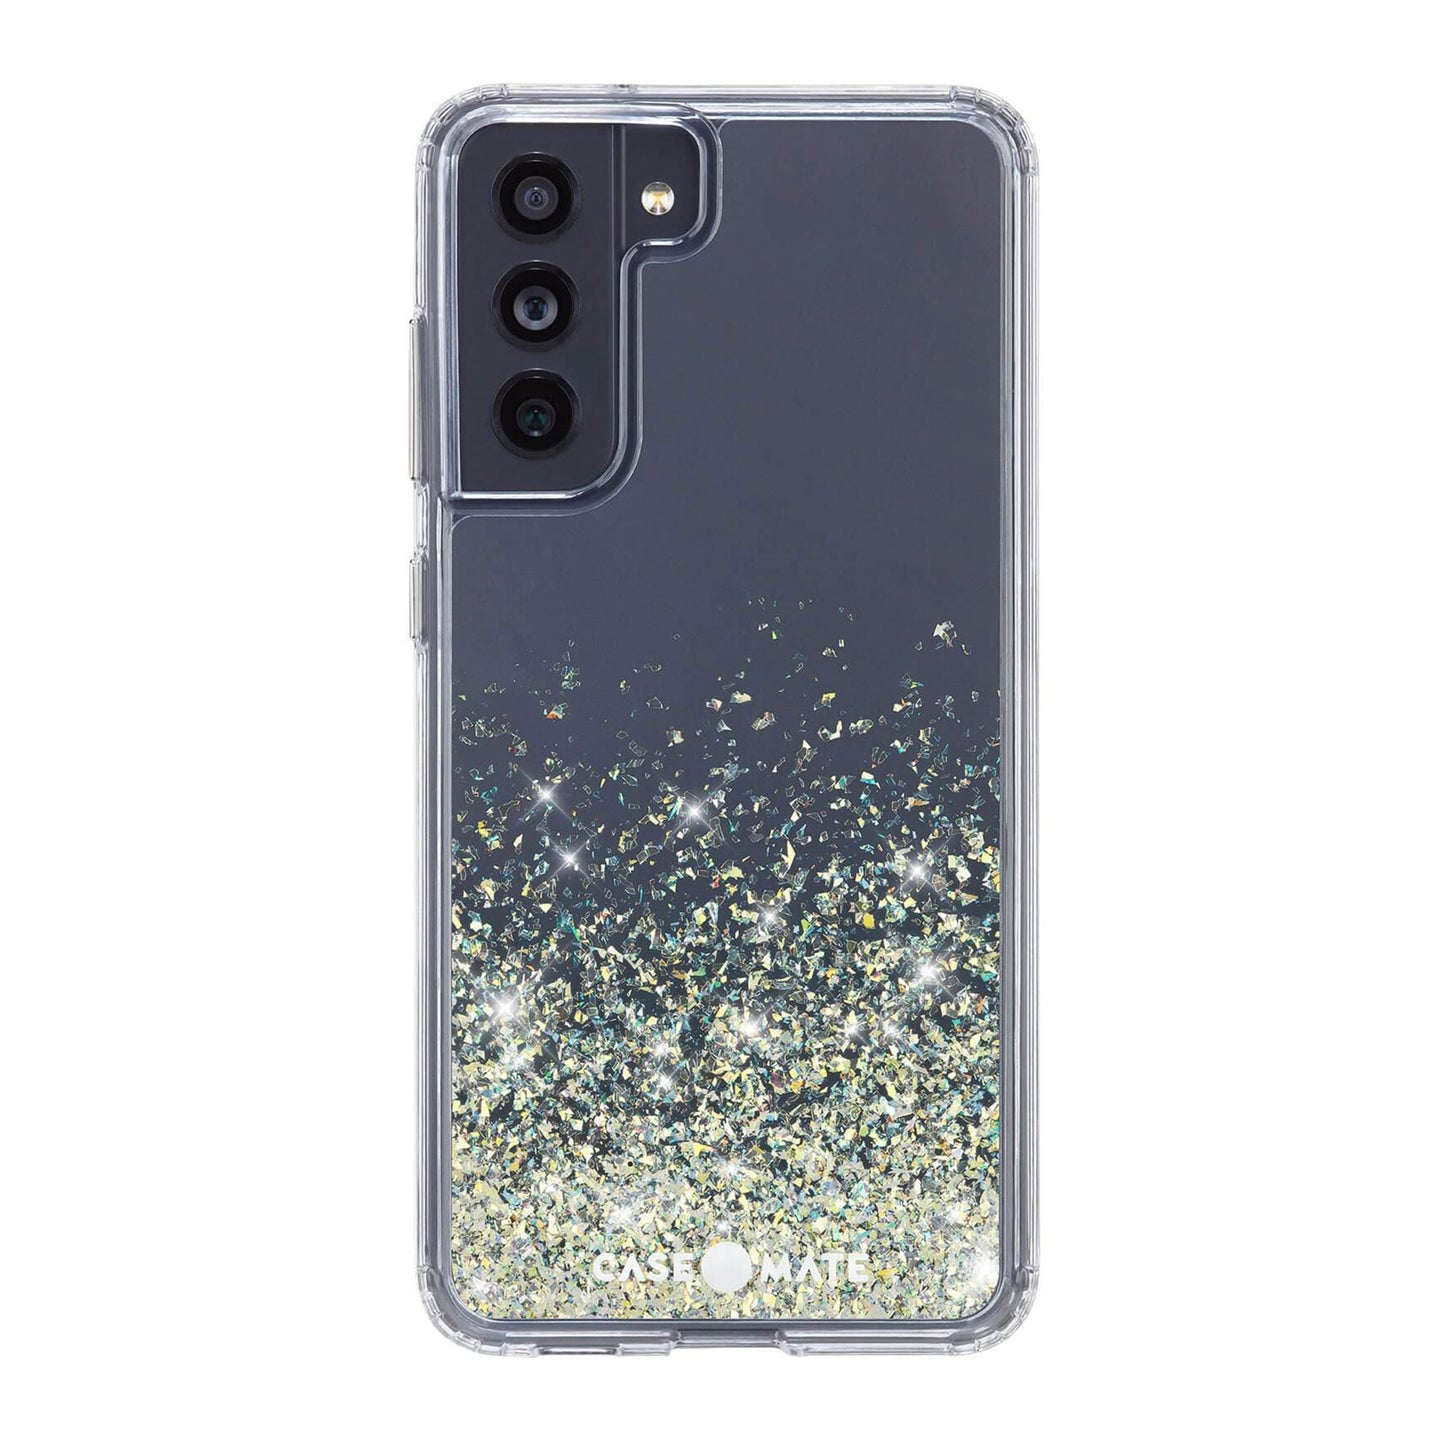 Samsung Galaxy S21 FE 5G Case-Mate Stardust Twinkle Ombre Case - 15-08860